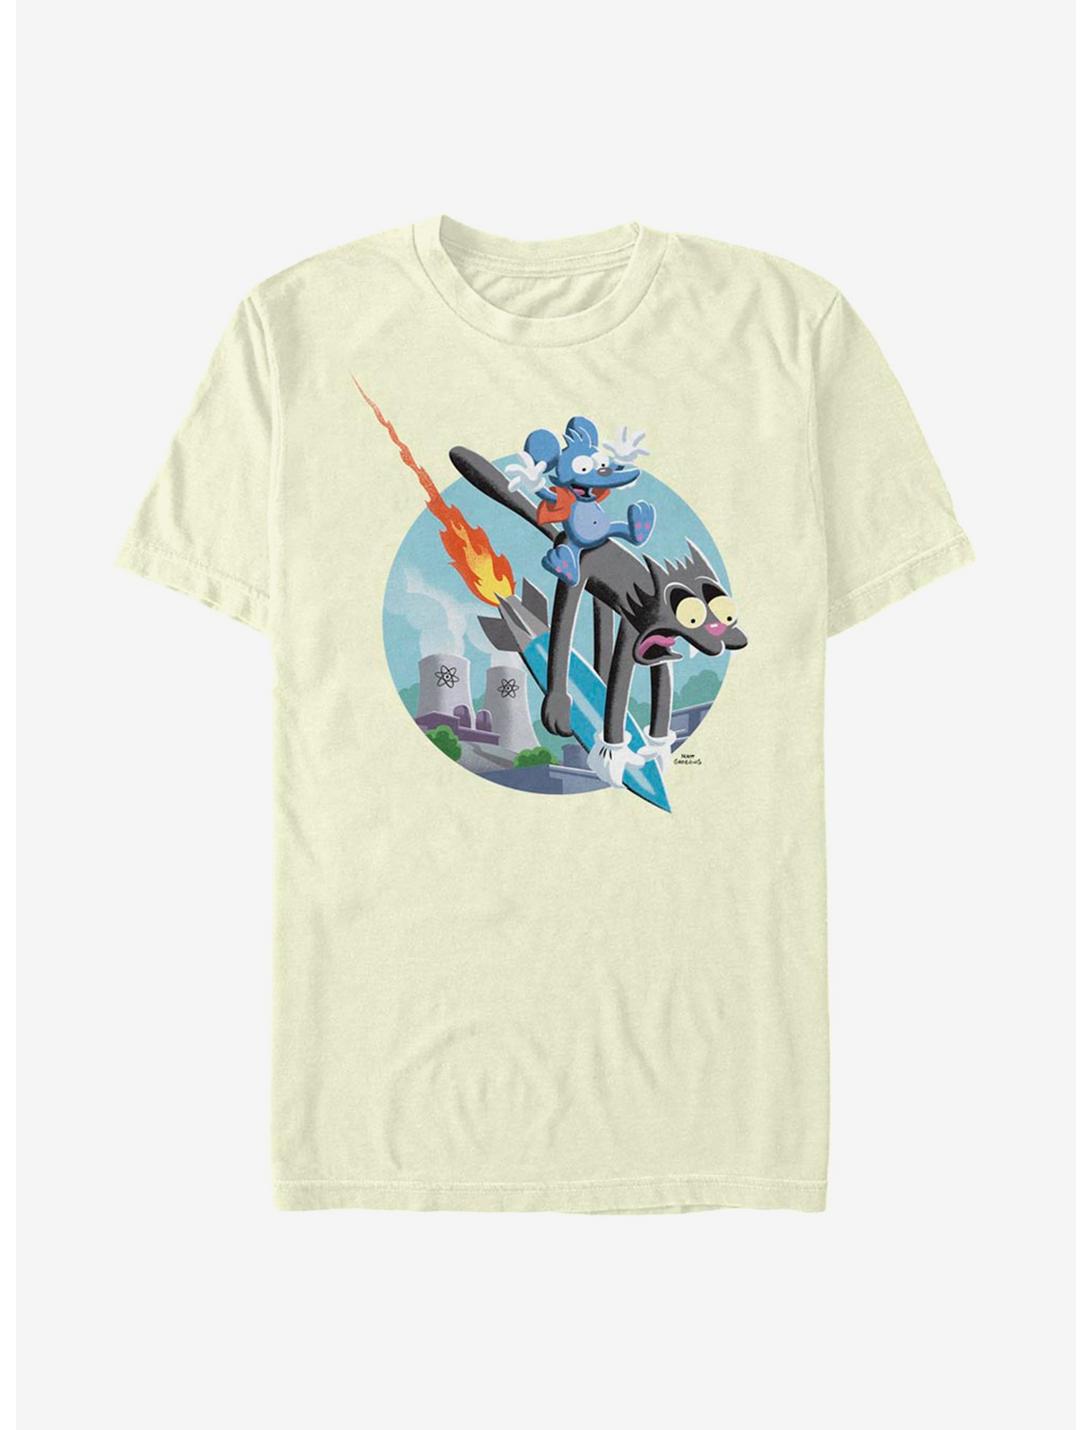 The Simpsons Itchy Scratchy Ride Missile T-Shirt, NATURAL, hi-res